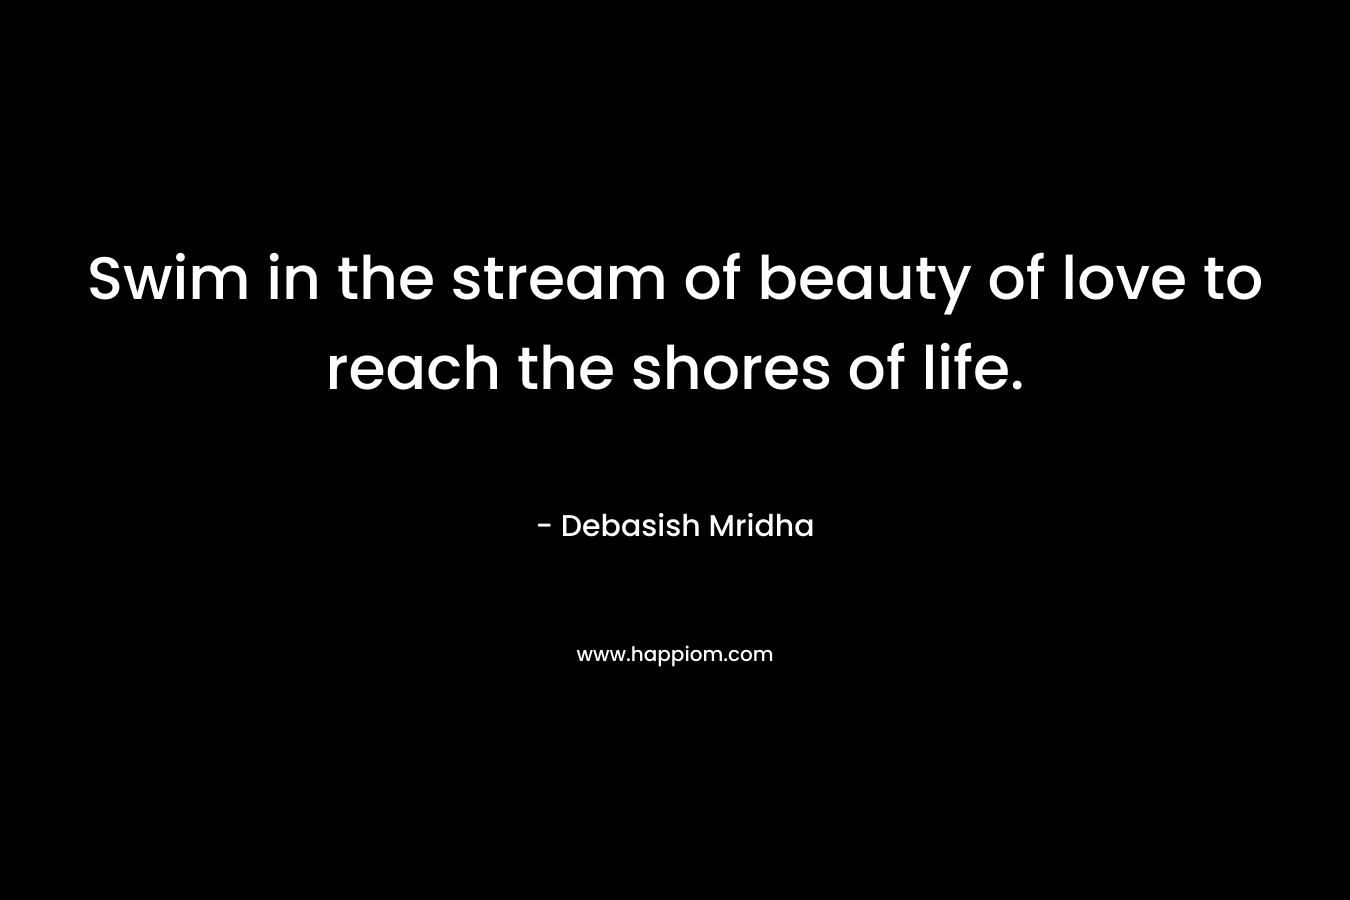 Swim in the stream of beauty of love to reach the shores of life. – Debasish Mridha